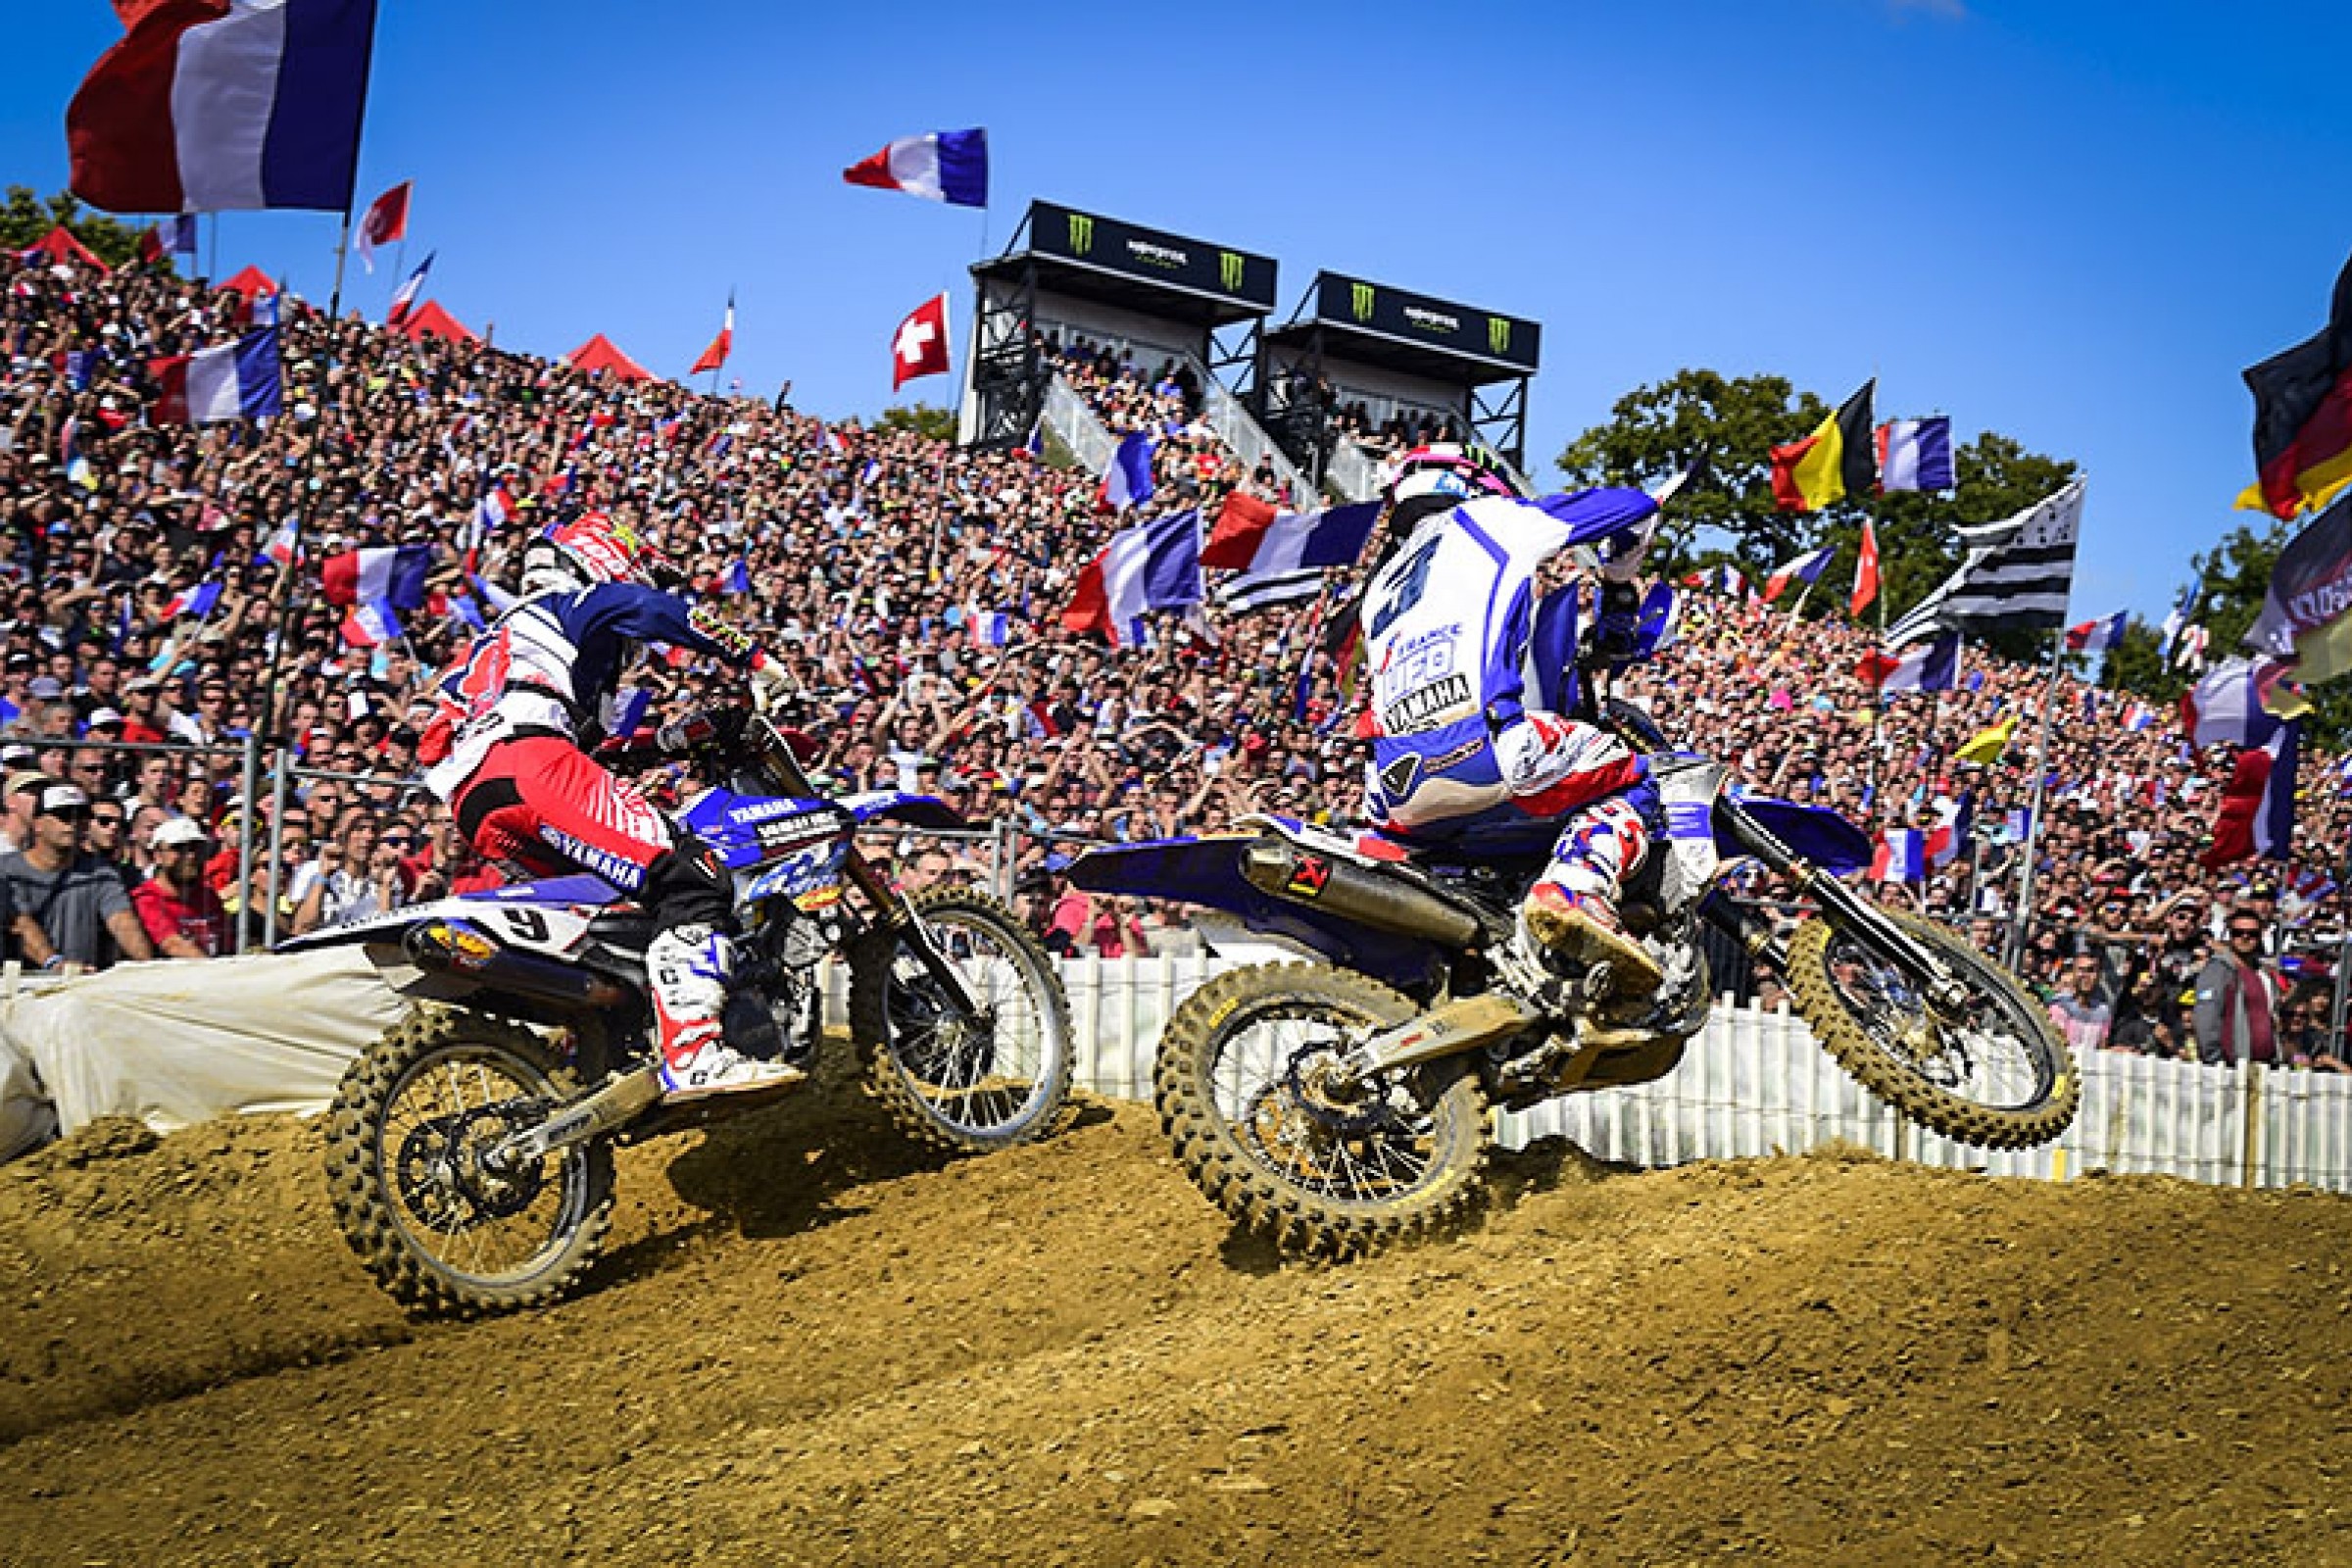 Motocross of Nations to Air Live on CBS Sports Network - Racer X Online